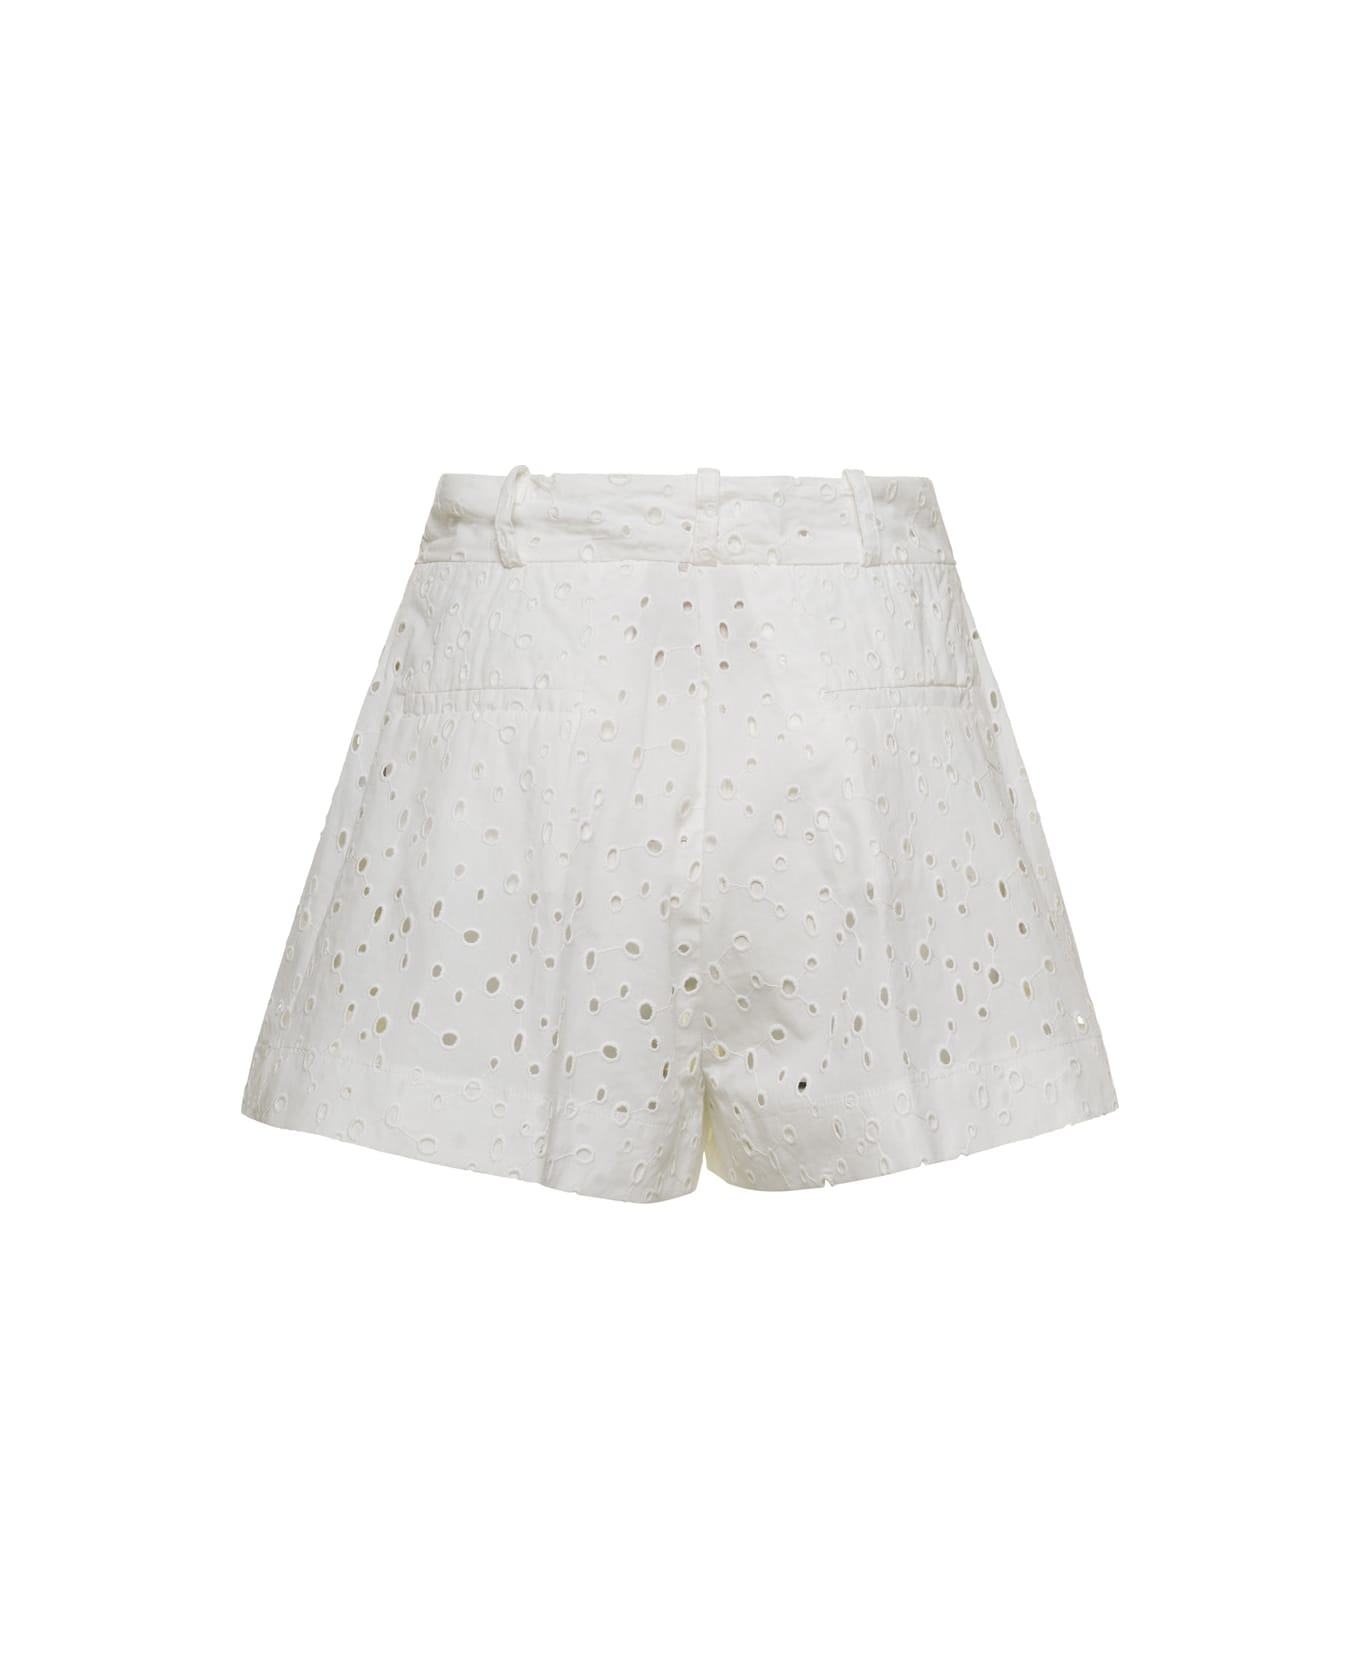 SEMICOUTURE White Broderie Anglaise Shorts In Cotton Blend Woman - White